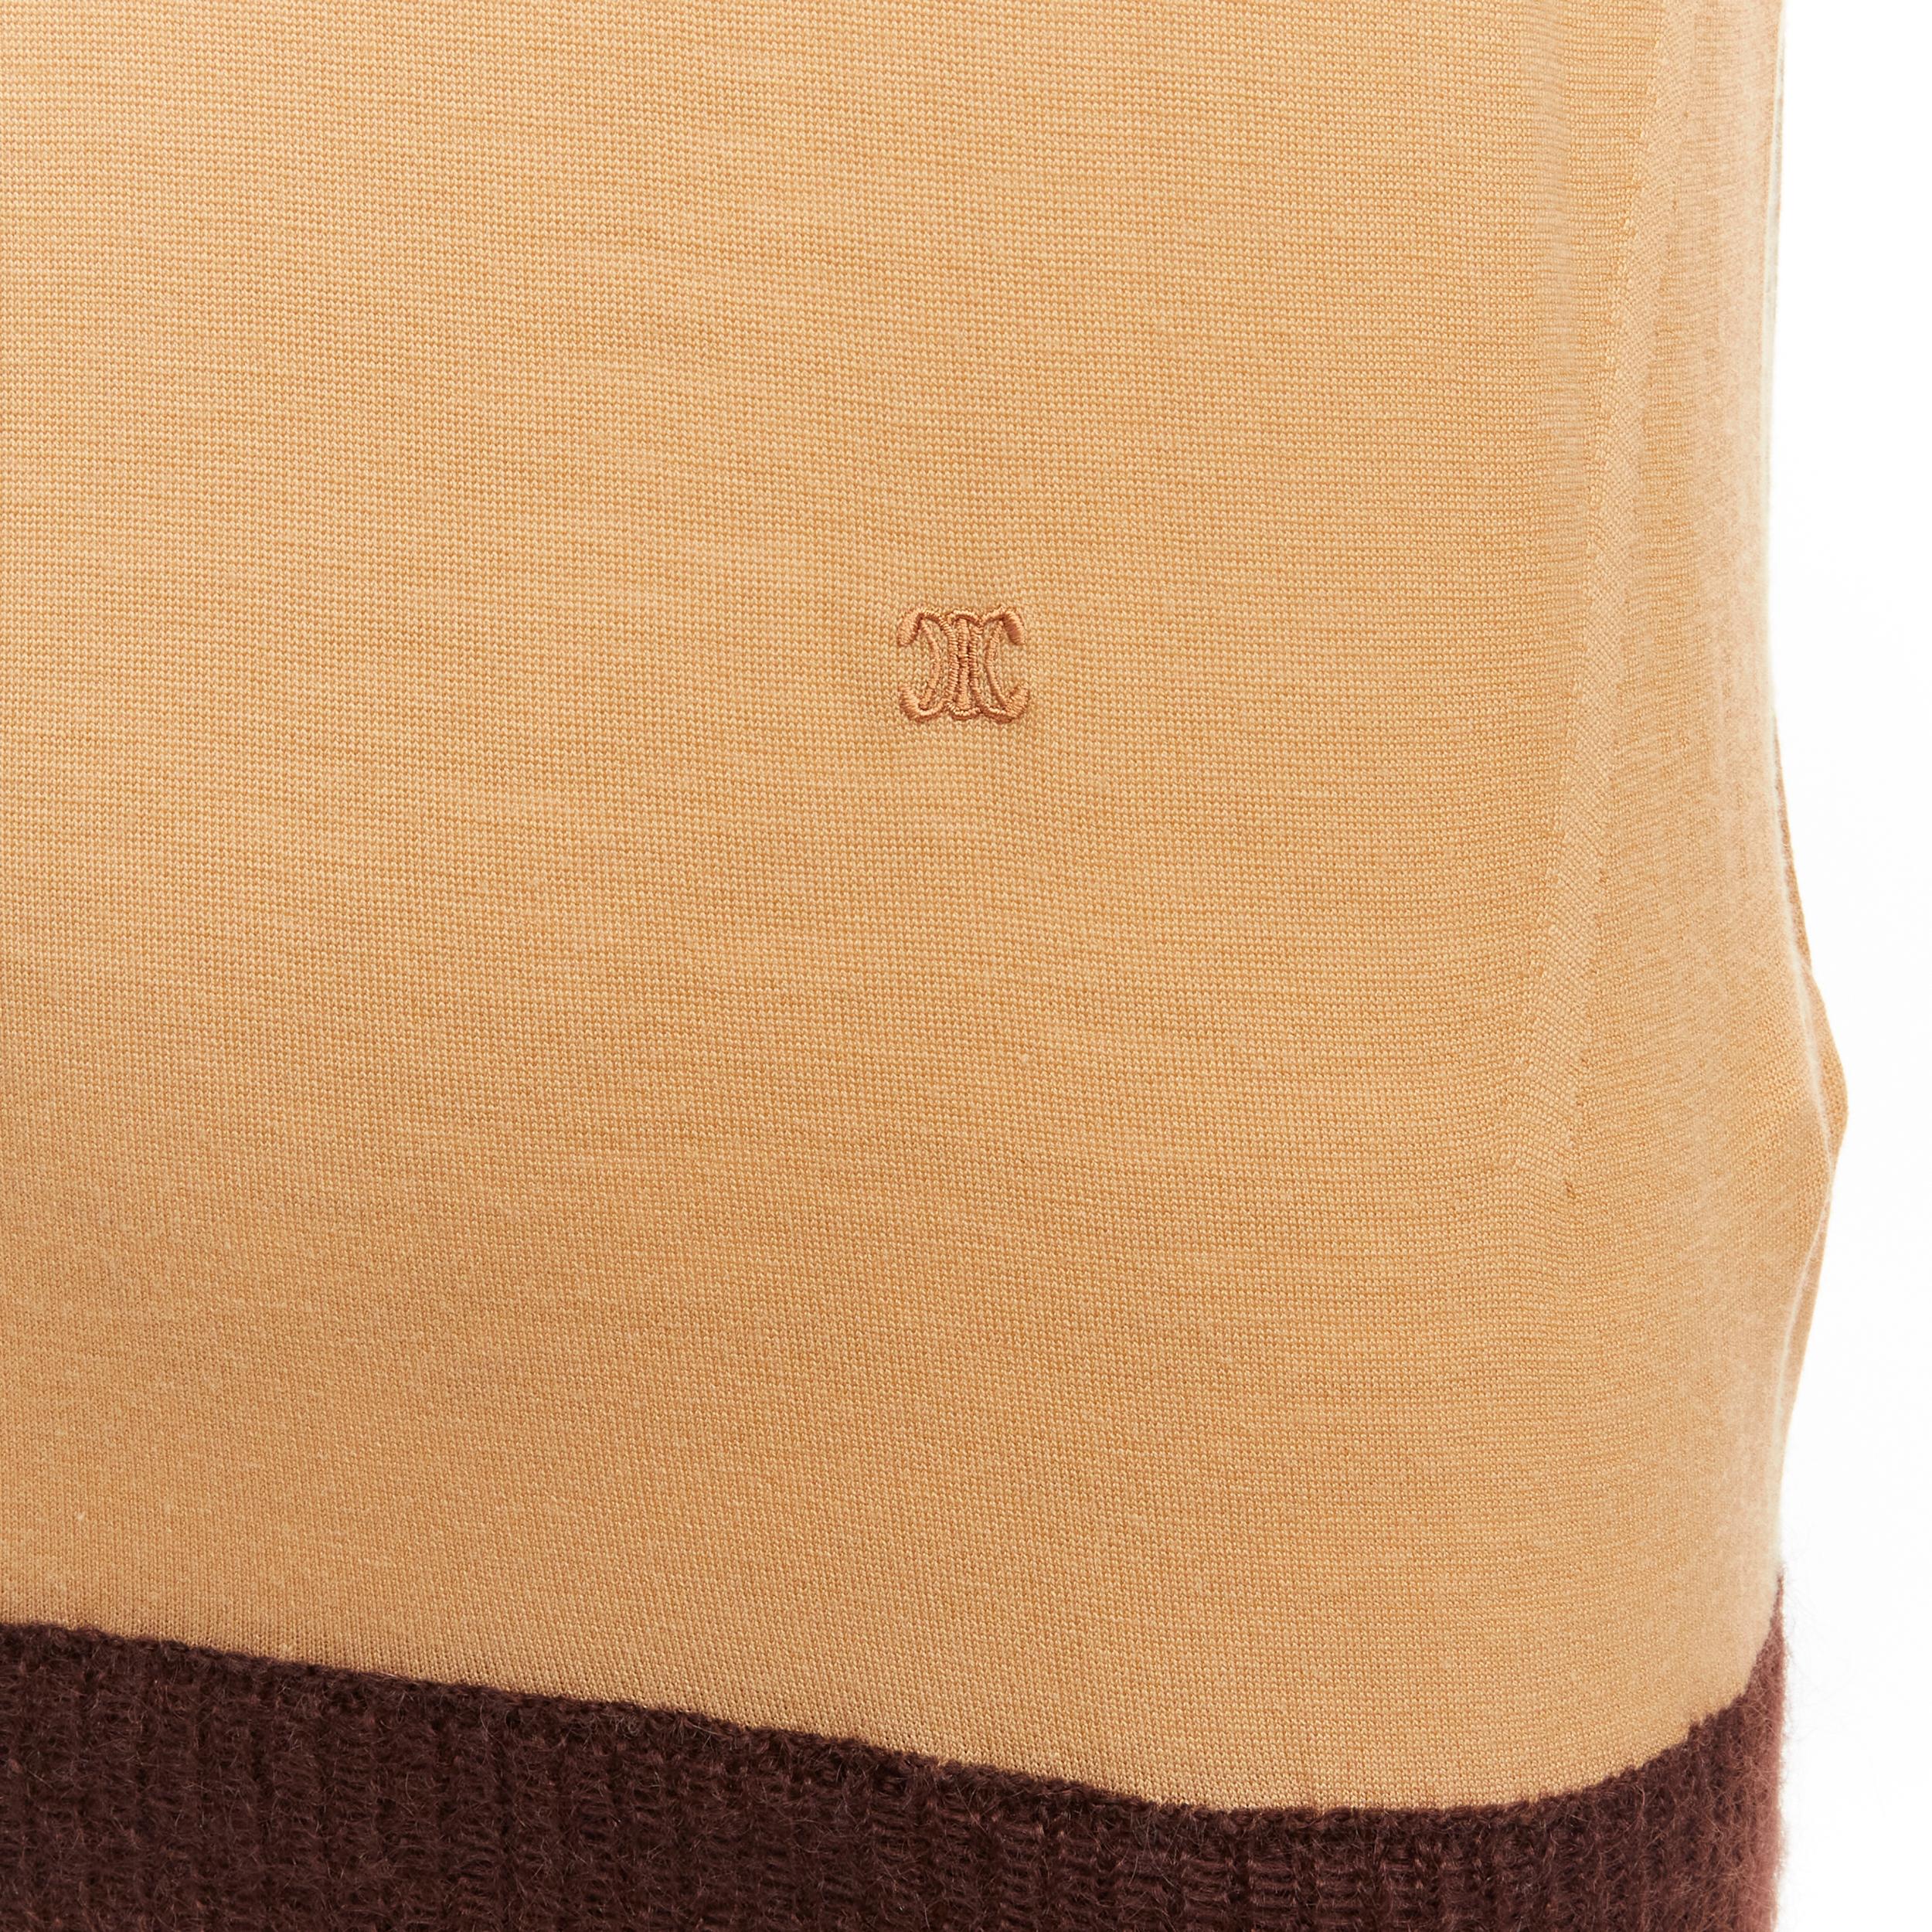 OLD CELINE Phoebe Philo 100% wool mohair blend Triomphe logo contrast cuff sweater XS
Reference: LNKO/A02125
Brand: Celine
Designer: Phoebe Philo
Material: Wool, Mohair, Blend
Color: Beige, Yellow
Pattern: Solid
Closure: Pullover
Extra Details: